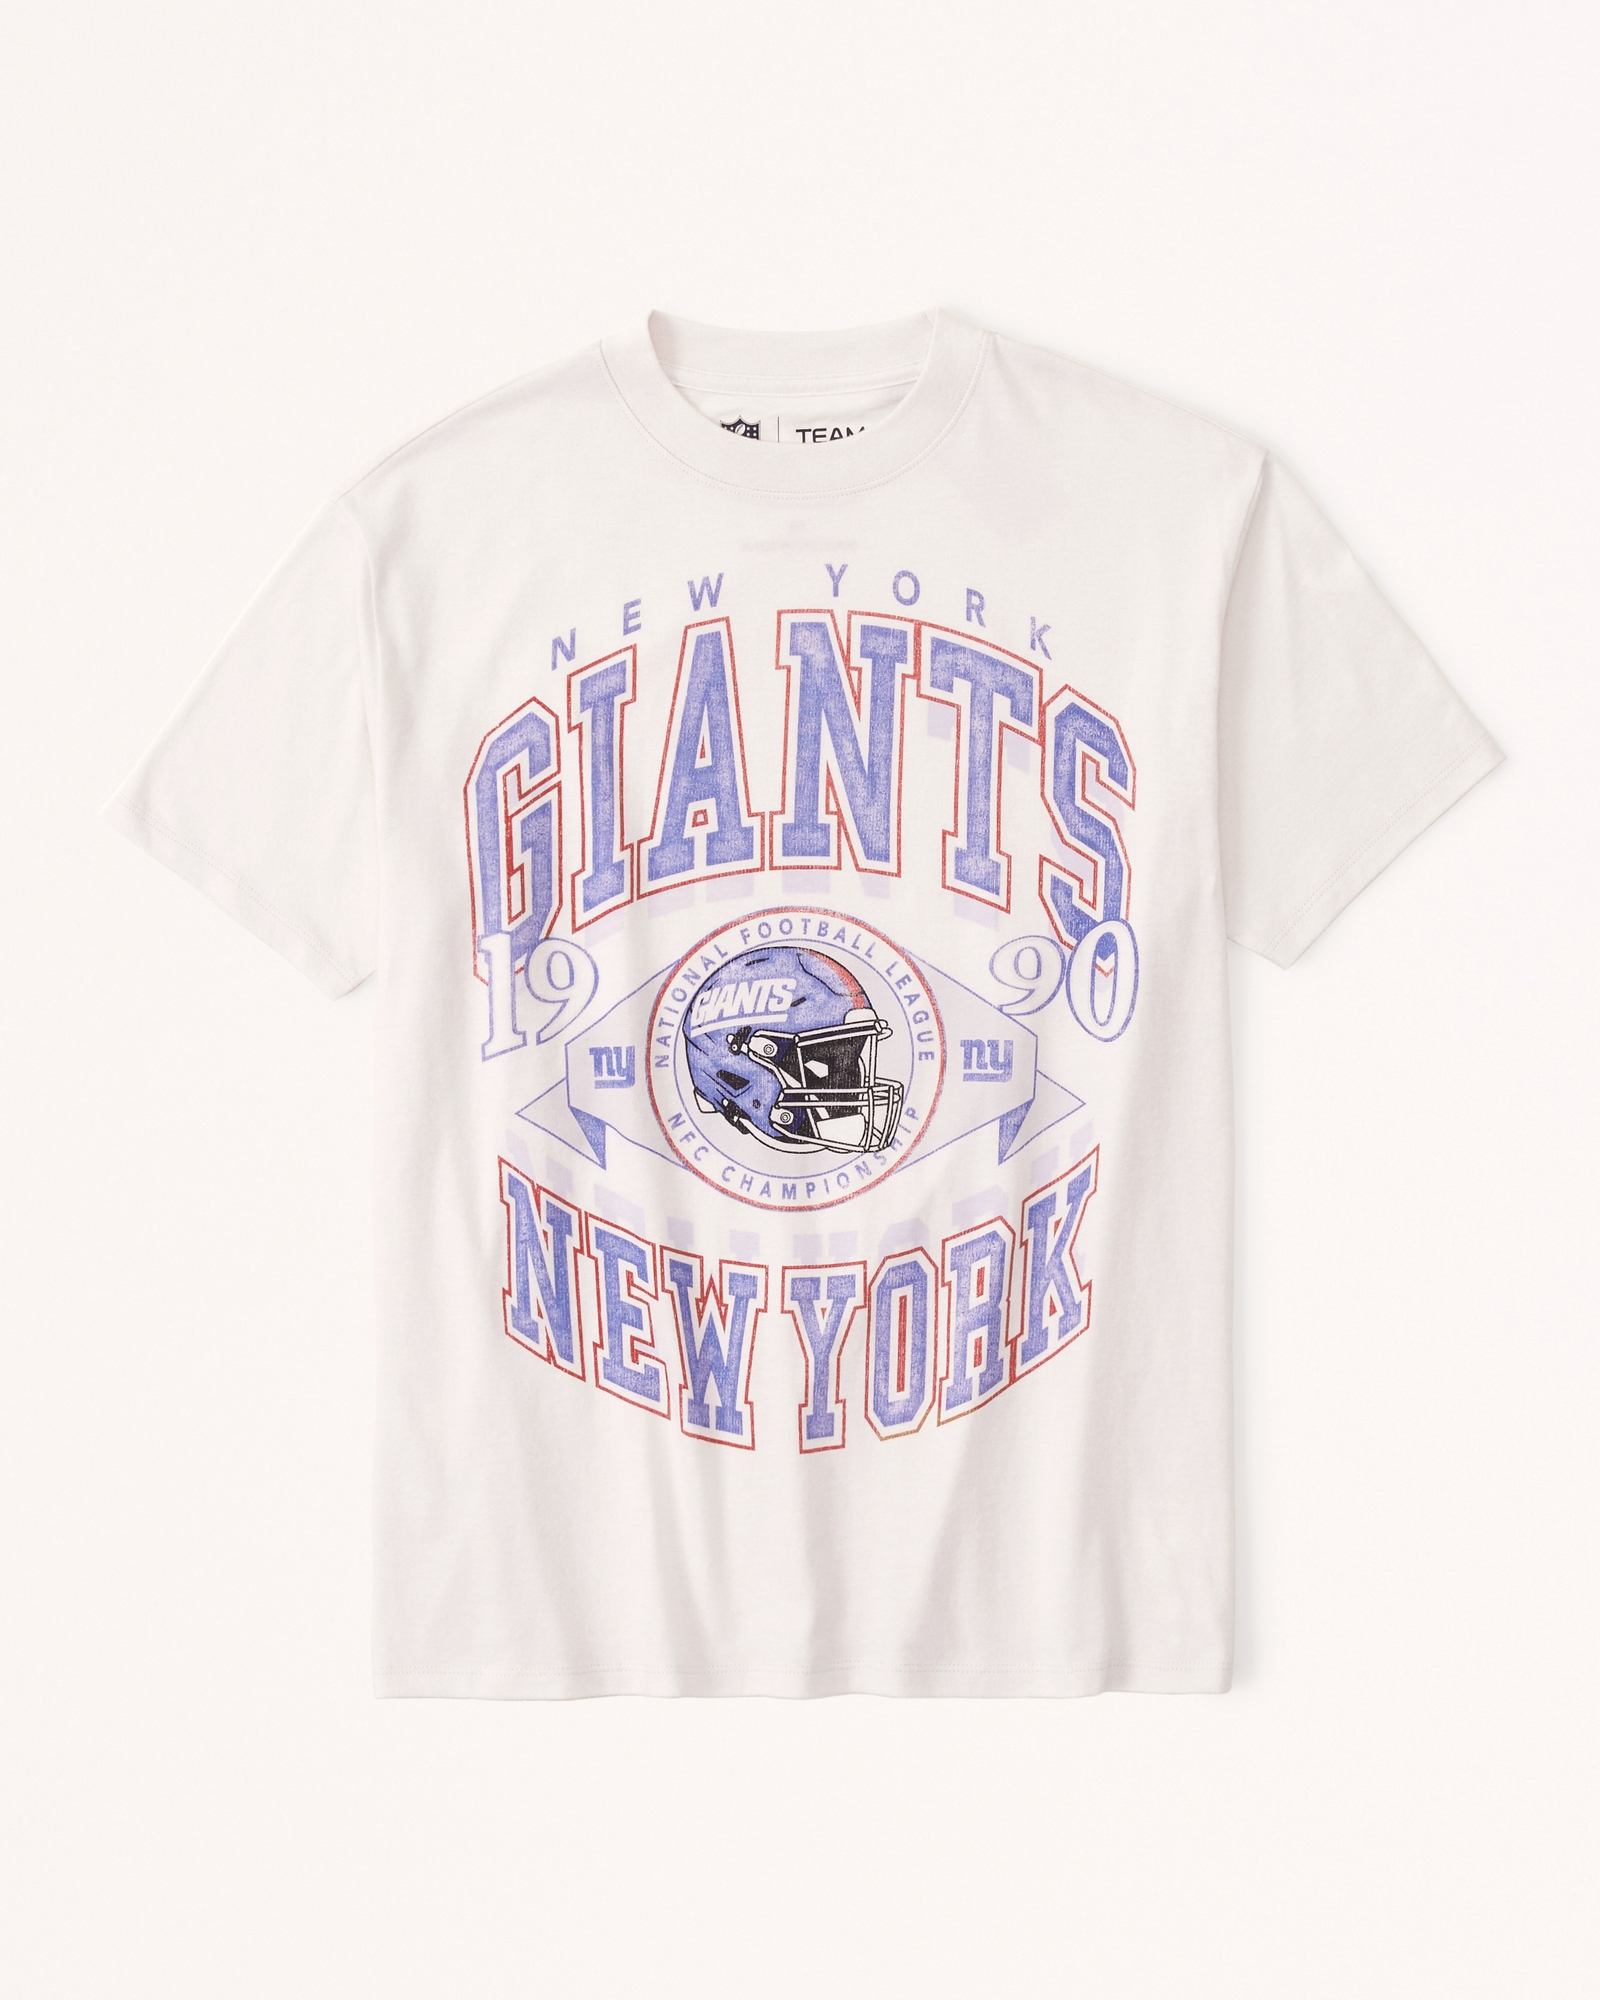 Official Abercrombie Clothing Store Shop Merch New York Giants Graphic  Hoodies - WBMTEE